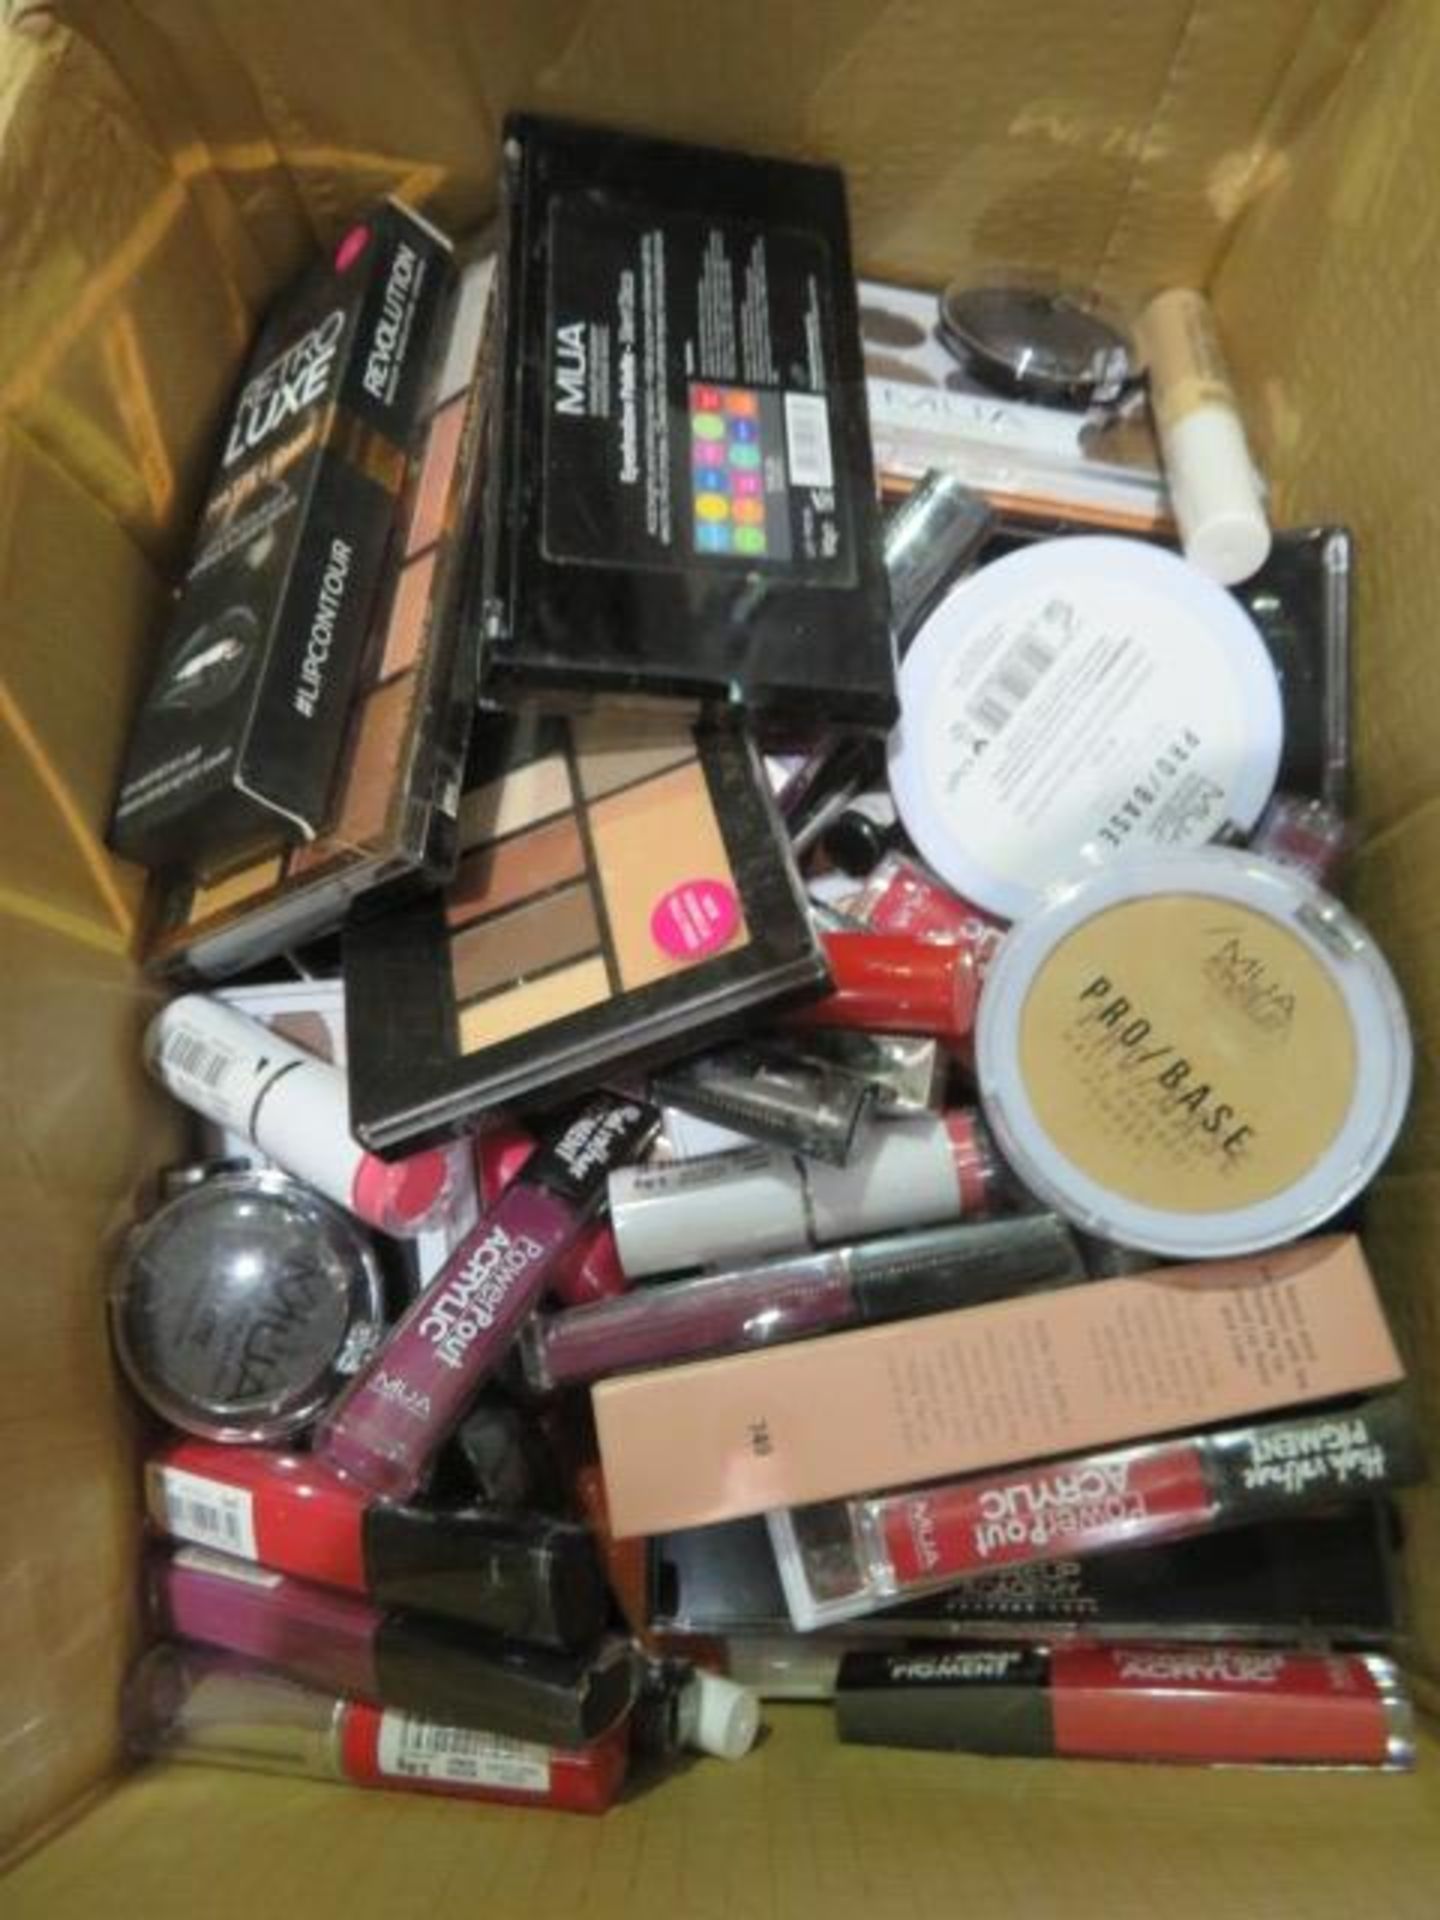 (Z79) Circa. 200 items of various new make up acadamy make up to include: barry M matte me up l...